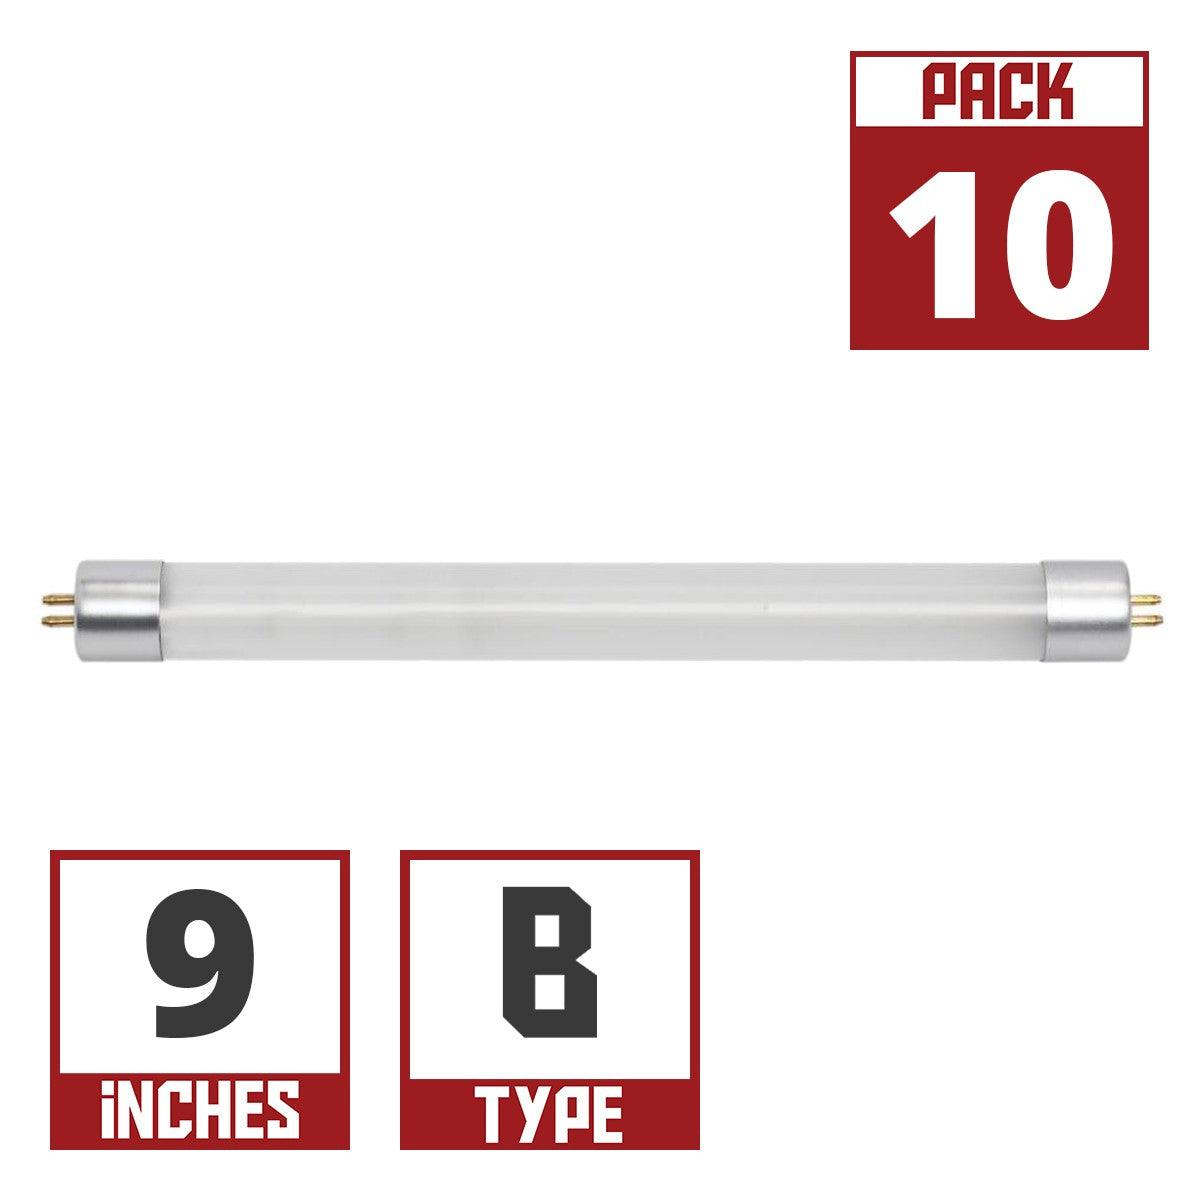 9 Inch LED mini T5 Tube, 2 Watt, 270 Lumens, 6500K, F6T5 Replacement, Ballast Bypass Double End, G5 Base (Case Of 10)